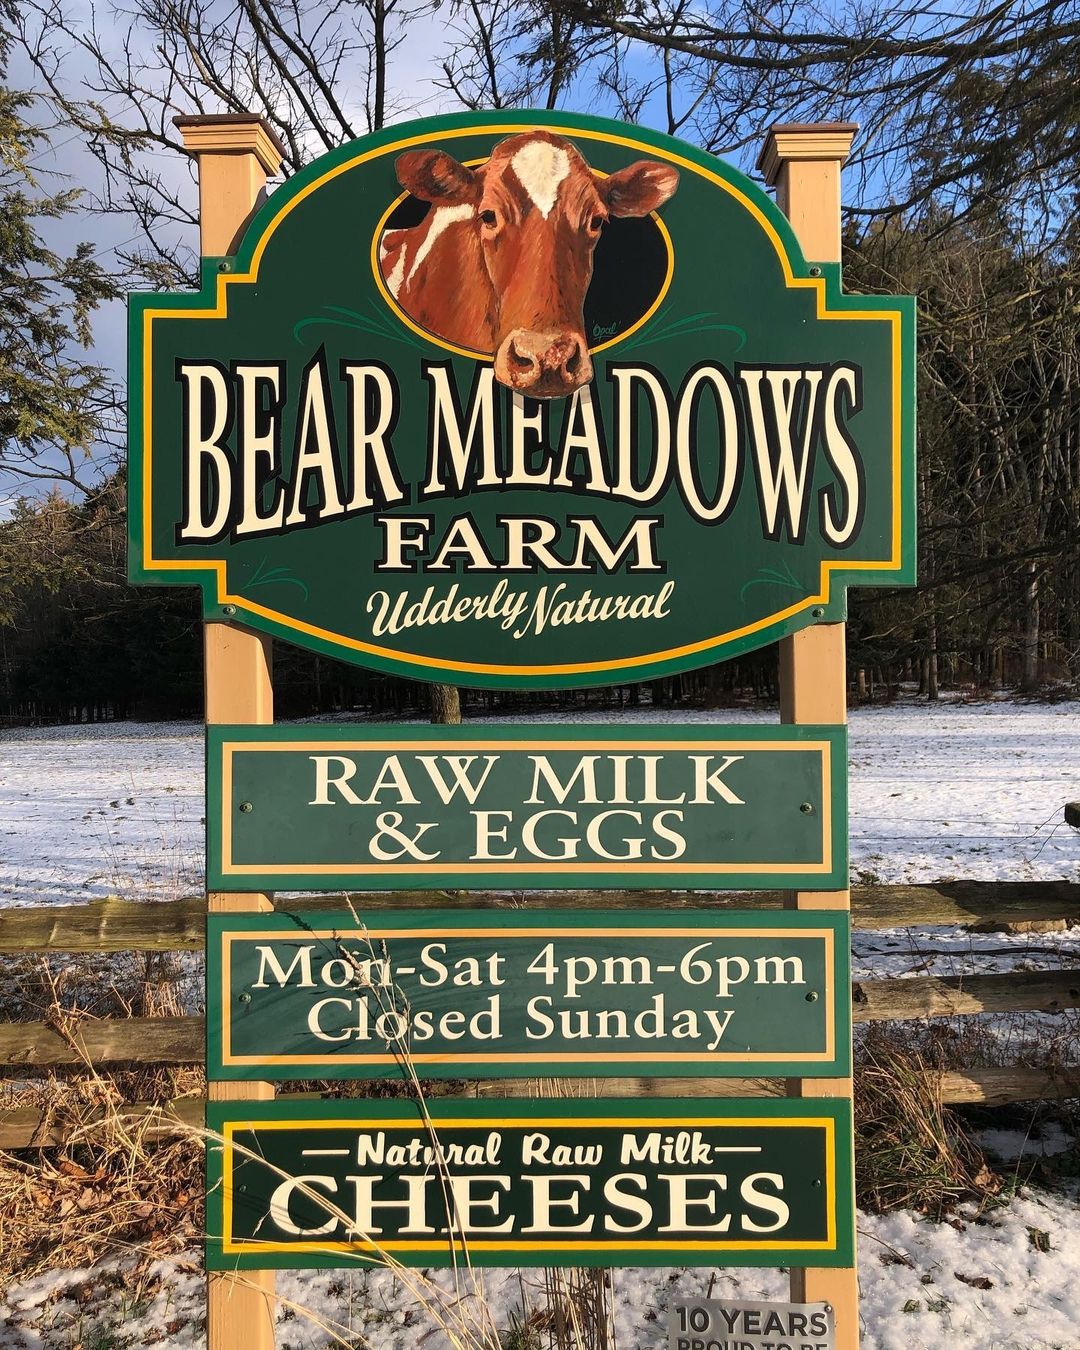 @bearmeadowsfarm is a locally owned farm selling raw milk and eggs. They have been permitted for raw milk sales since 2009 and since then have been selling raw milk to the greater State College area. 